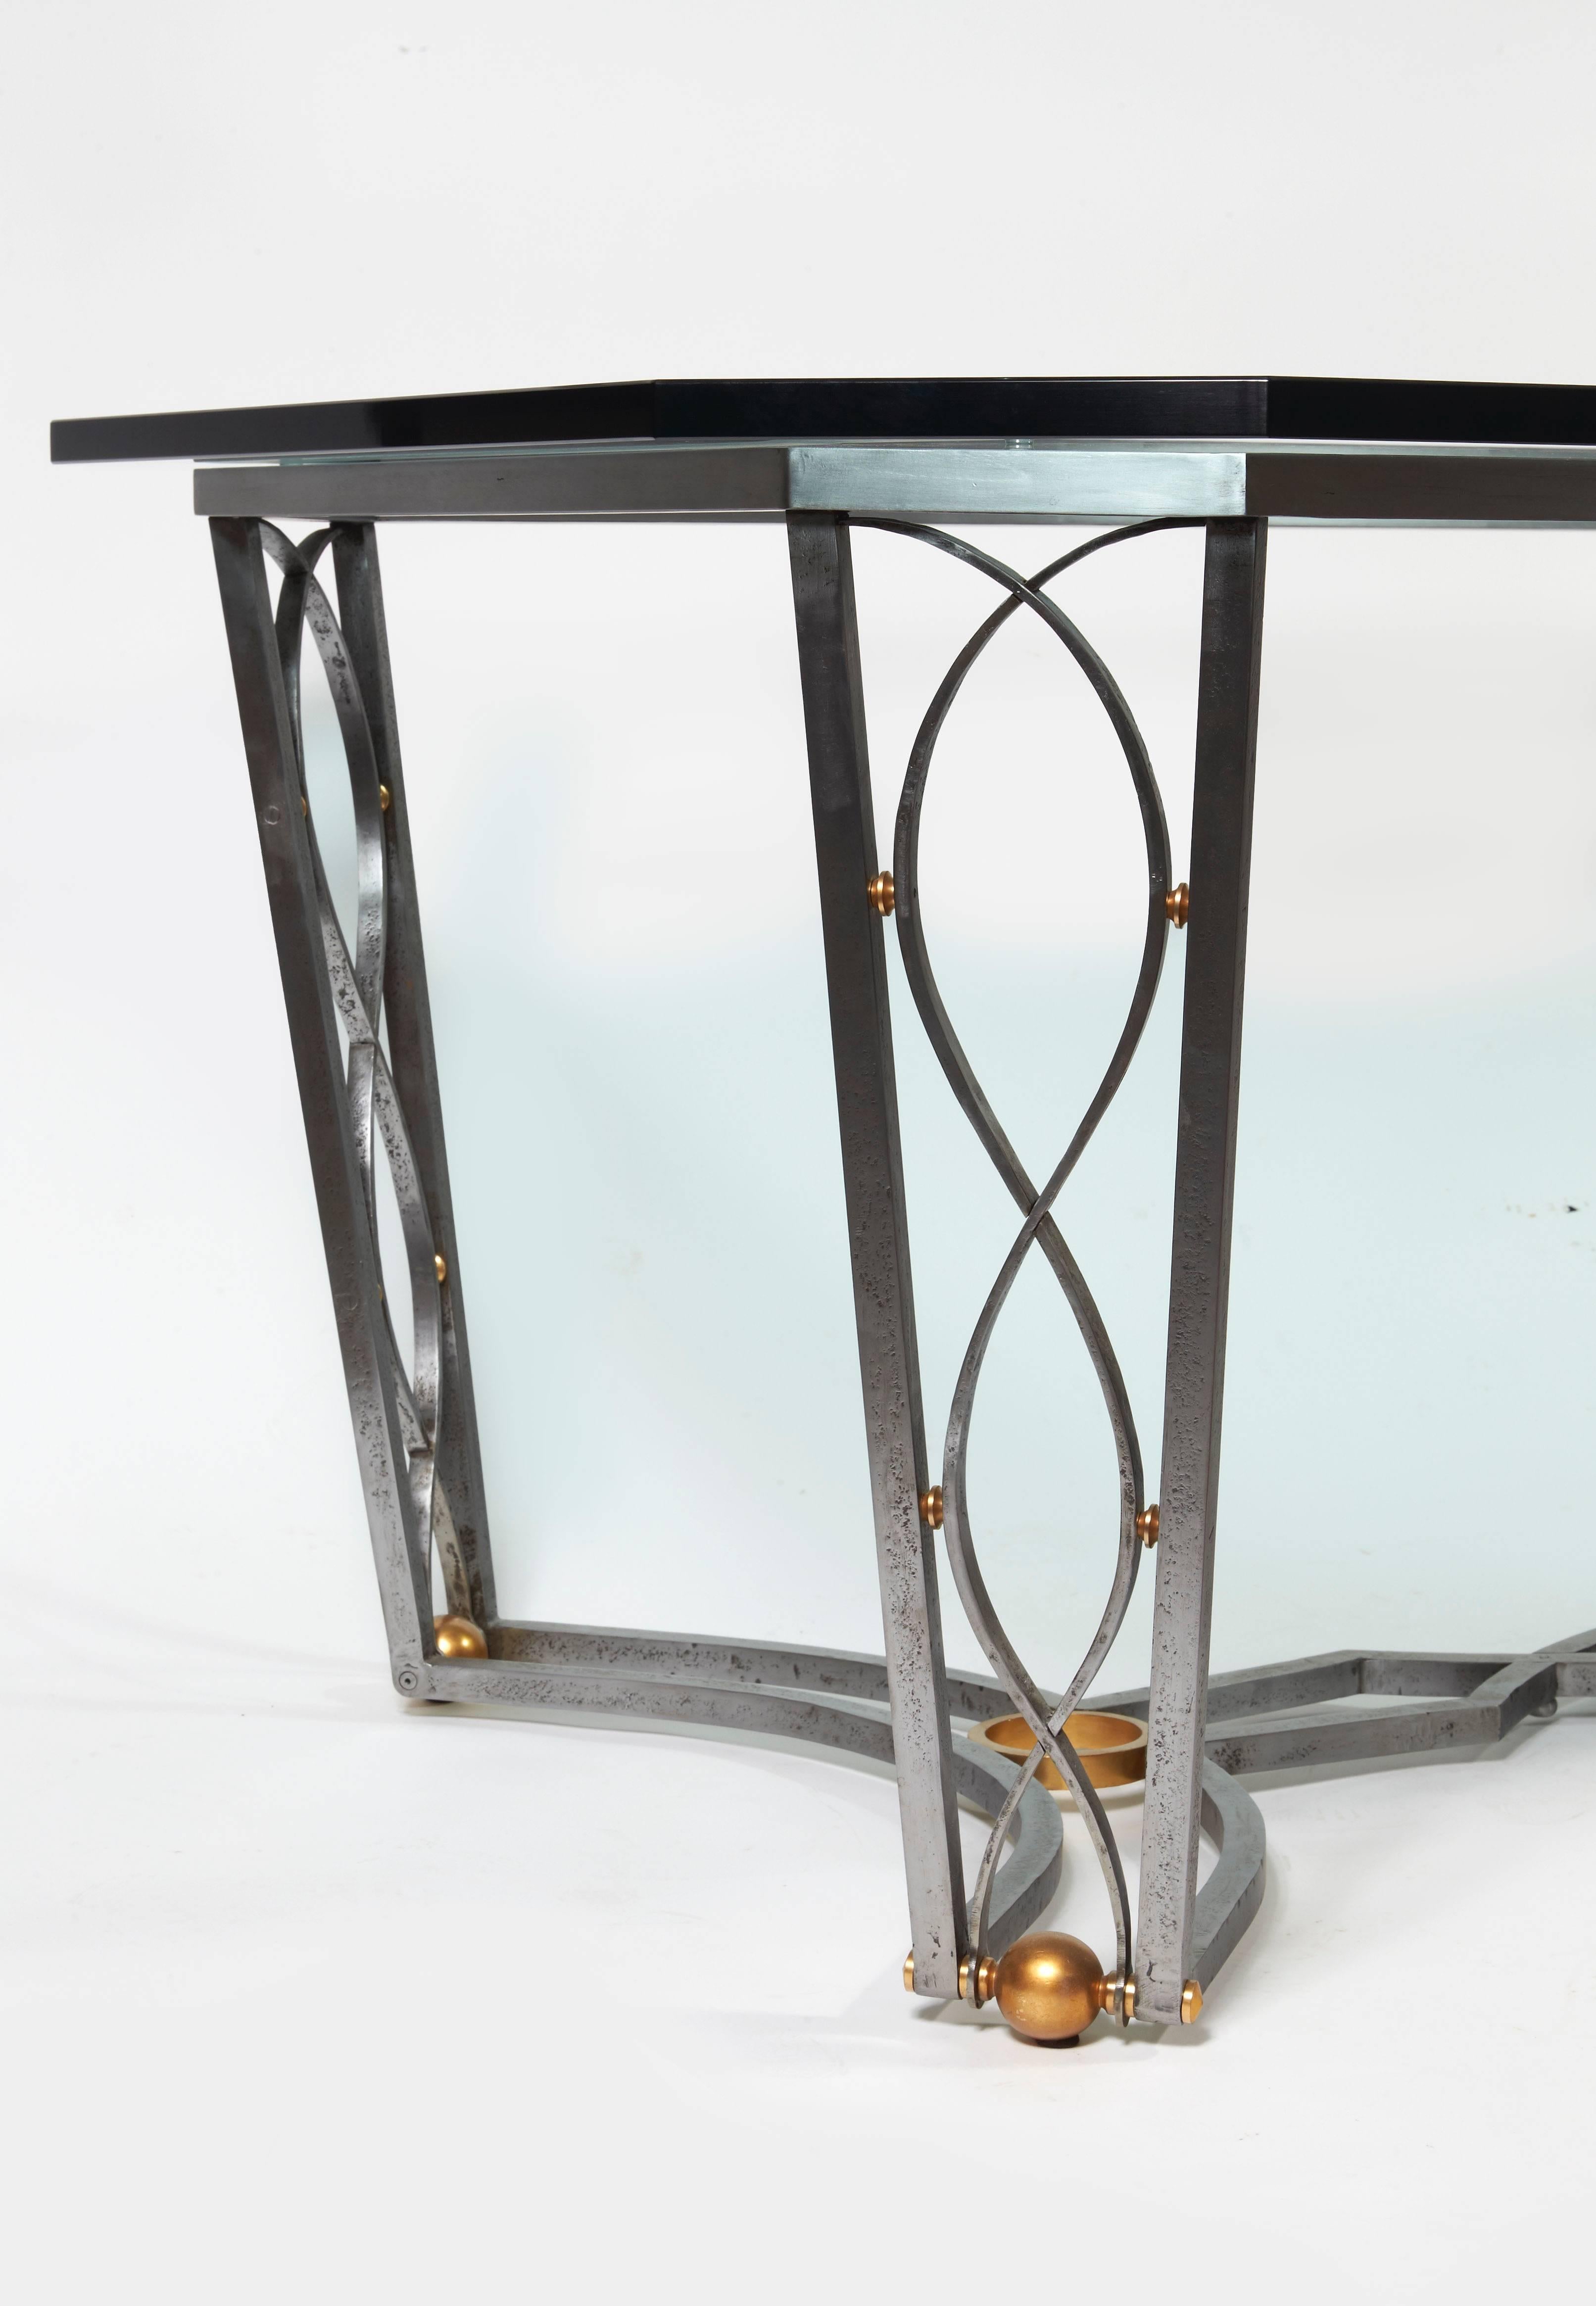 Art Deco Dining Room Table by Dominique, circa 1960-1965